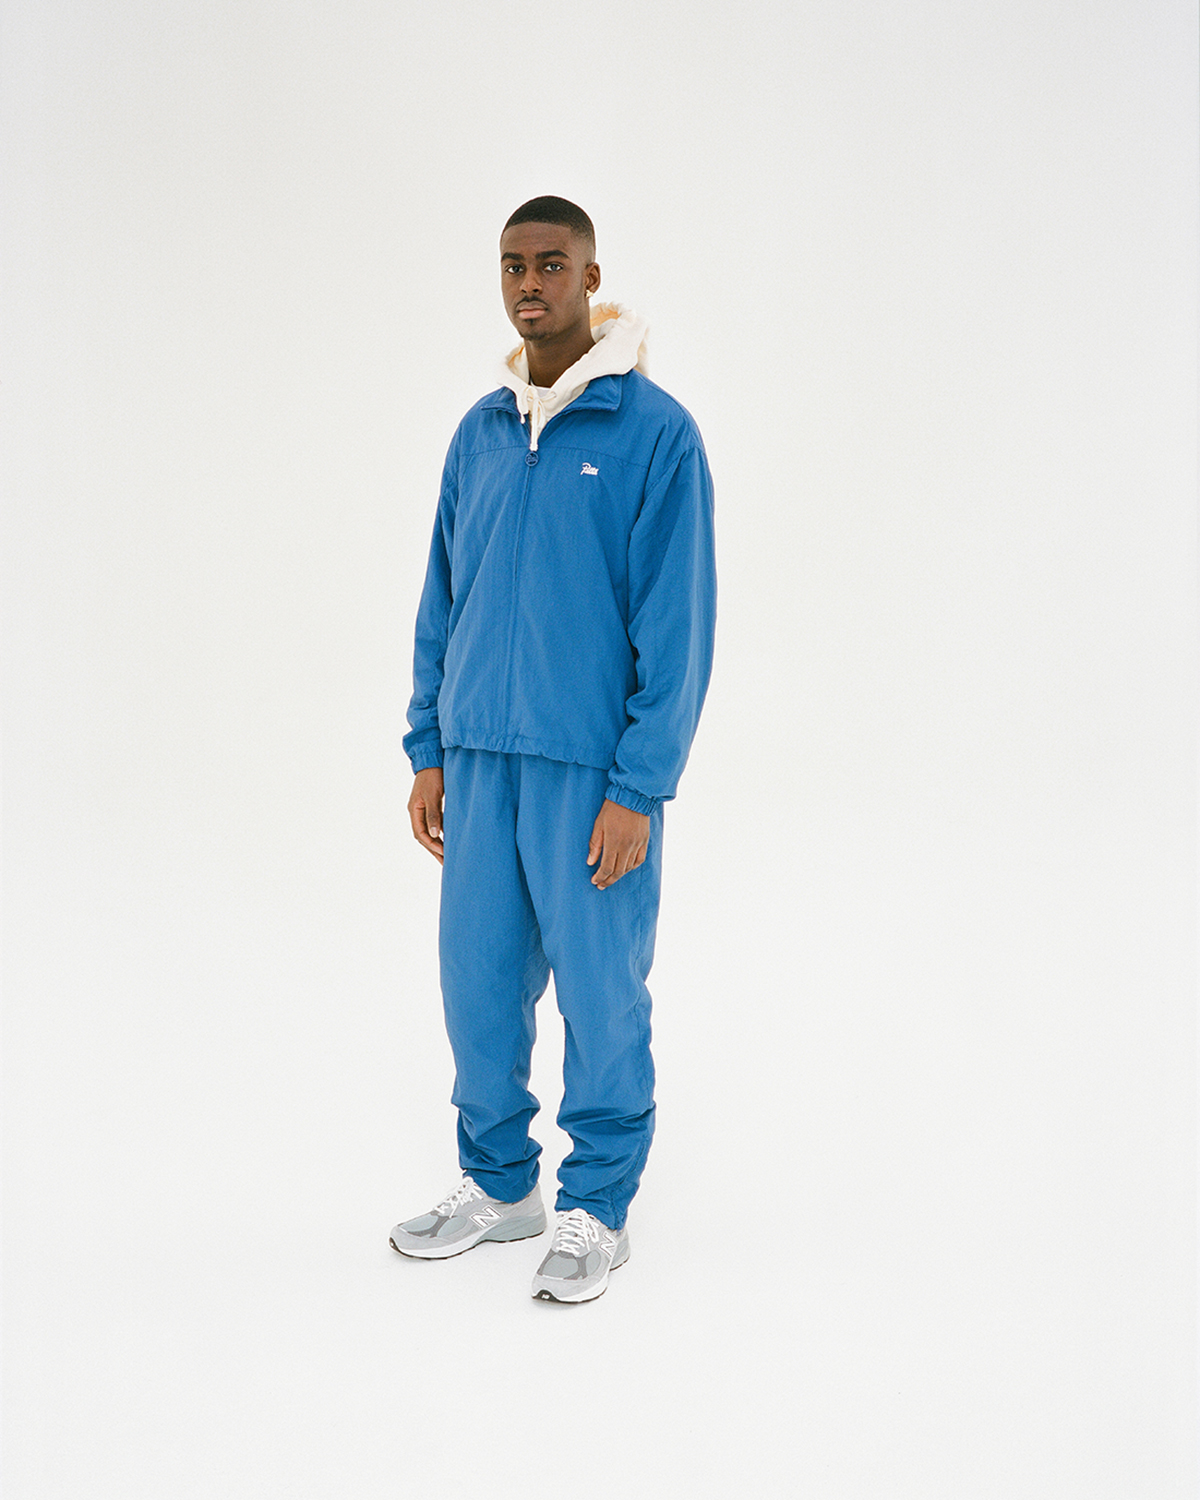 Patta SS22 Collection: Preview & Where to Buy